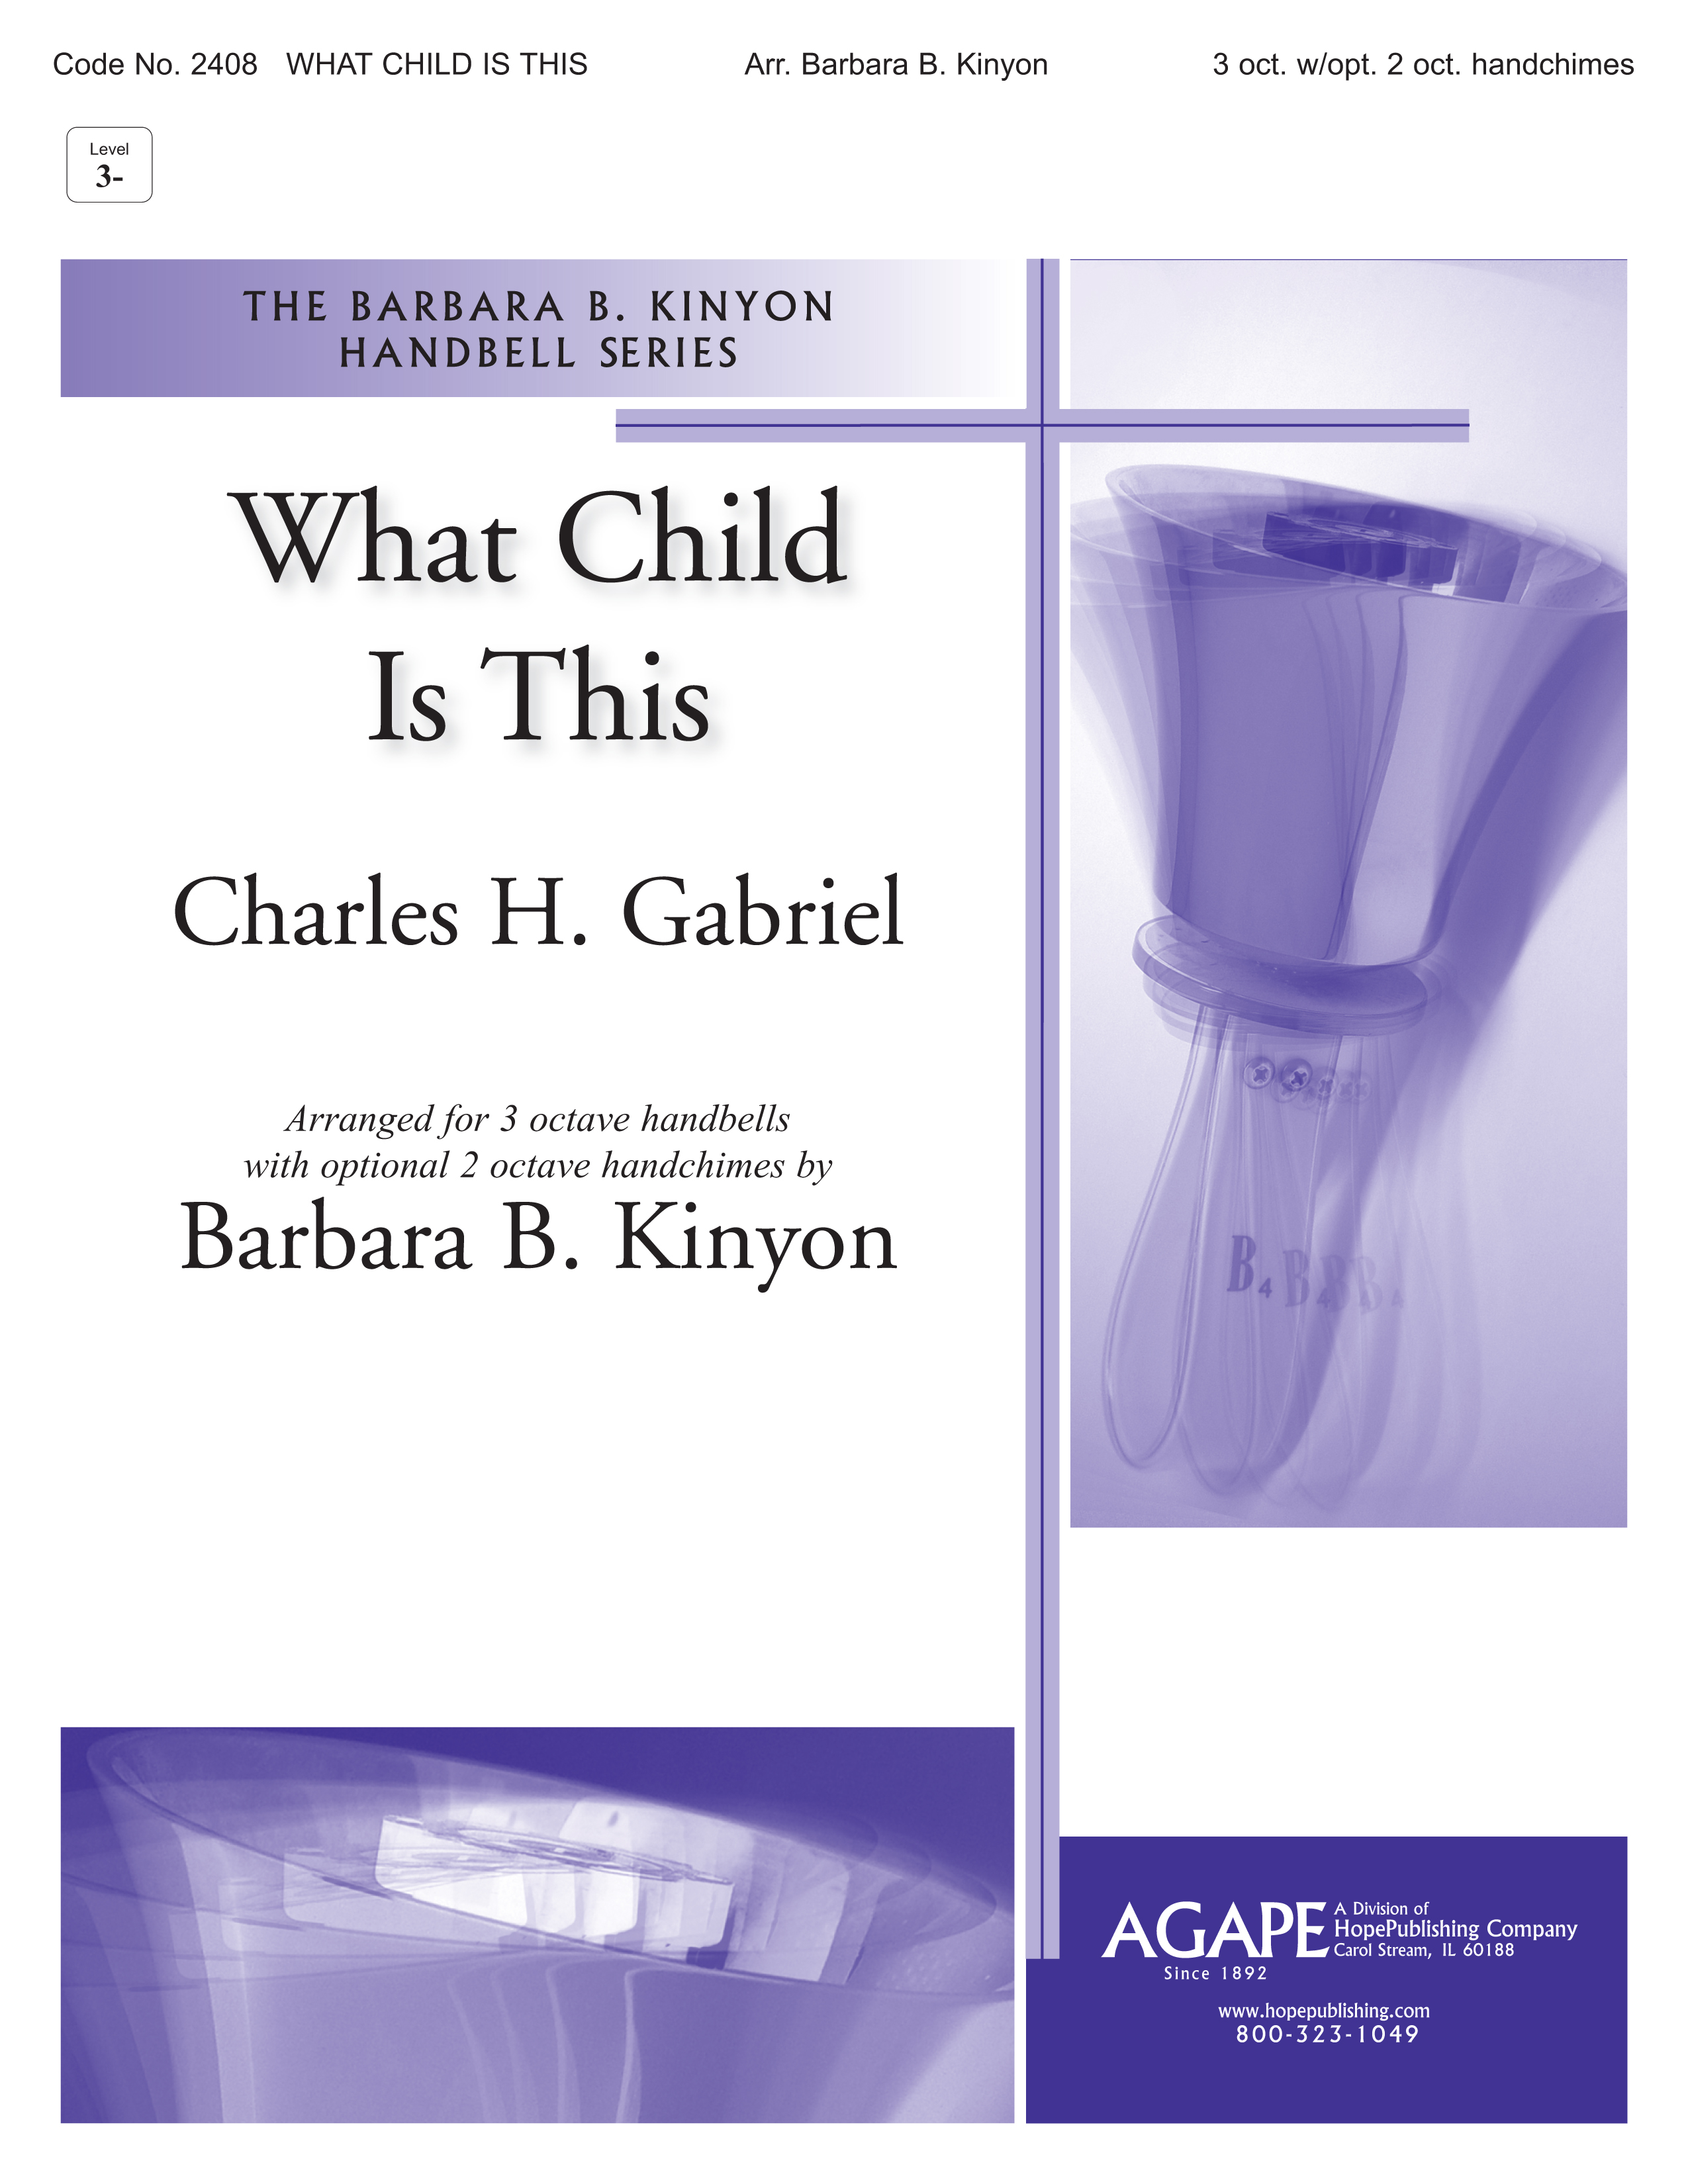 What Child Is This - 3 Oct. Cover Image